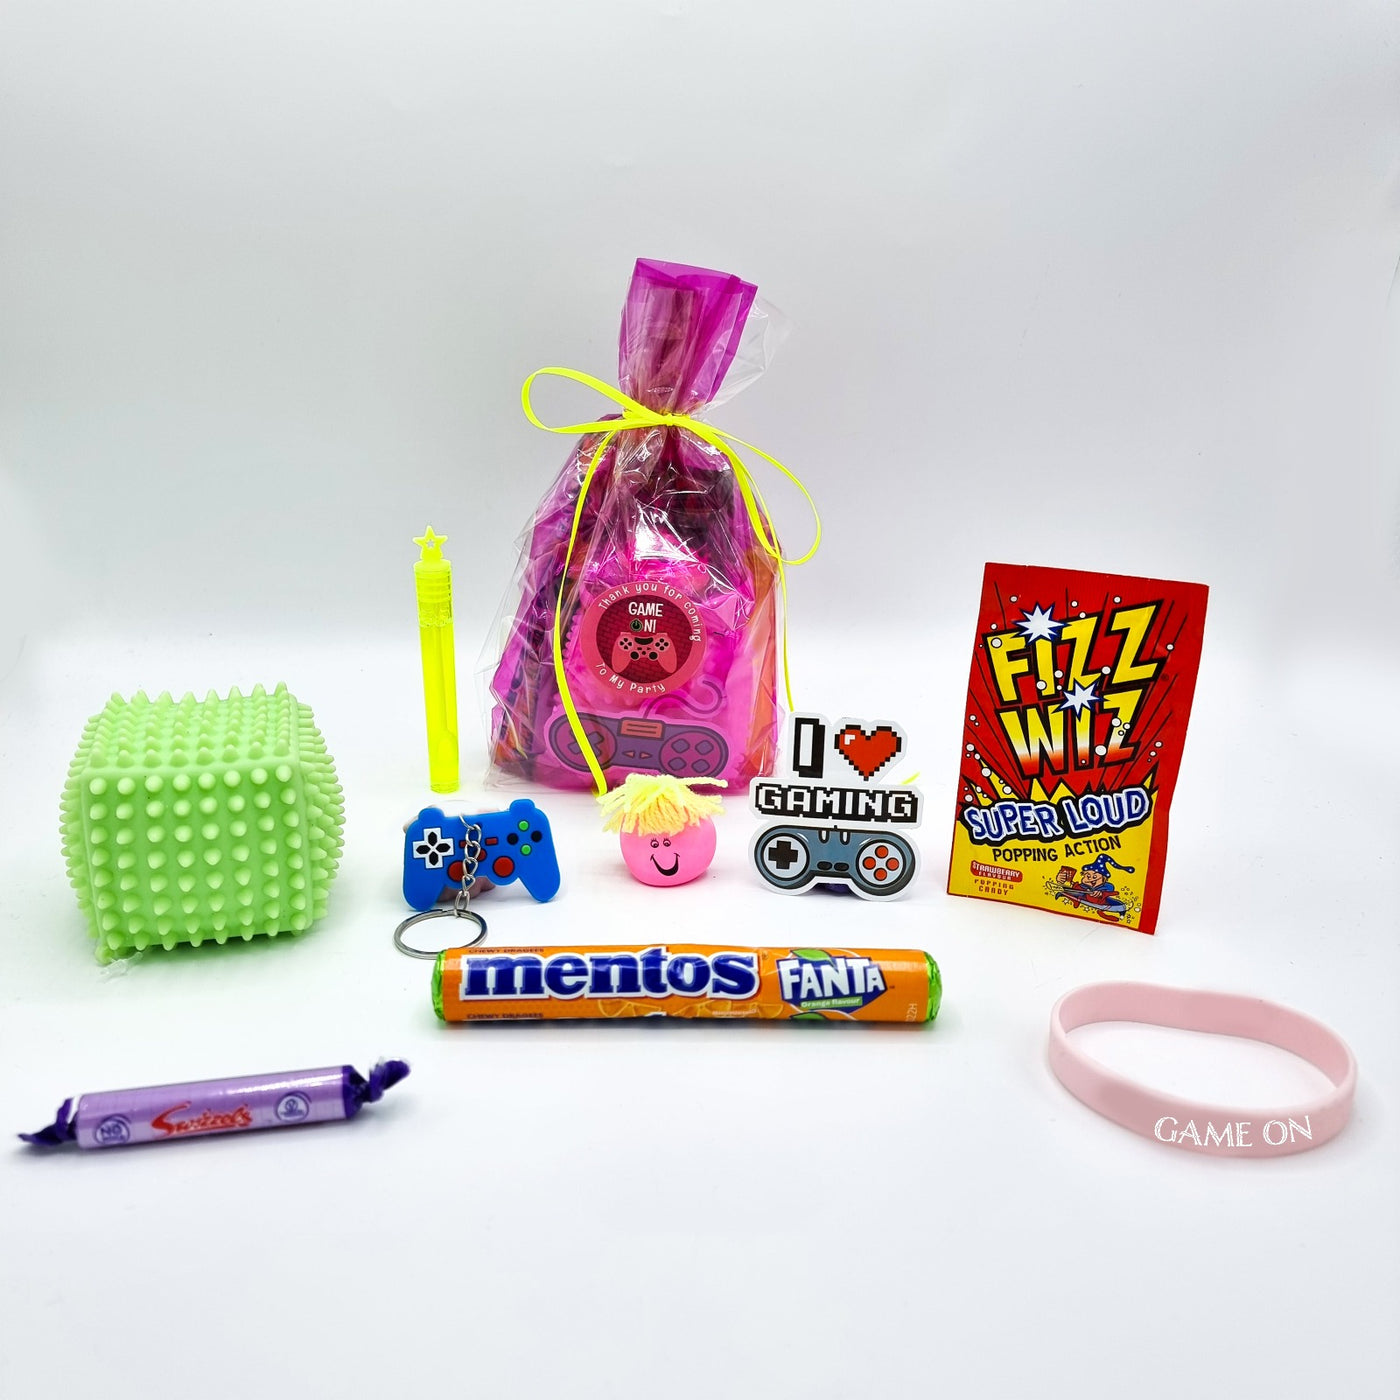 Ready Made Girls Birthday Gamer Party Goody Bags With Toys And Sweets, Party Favours.